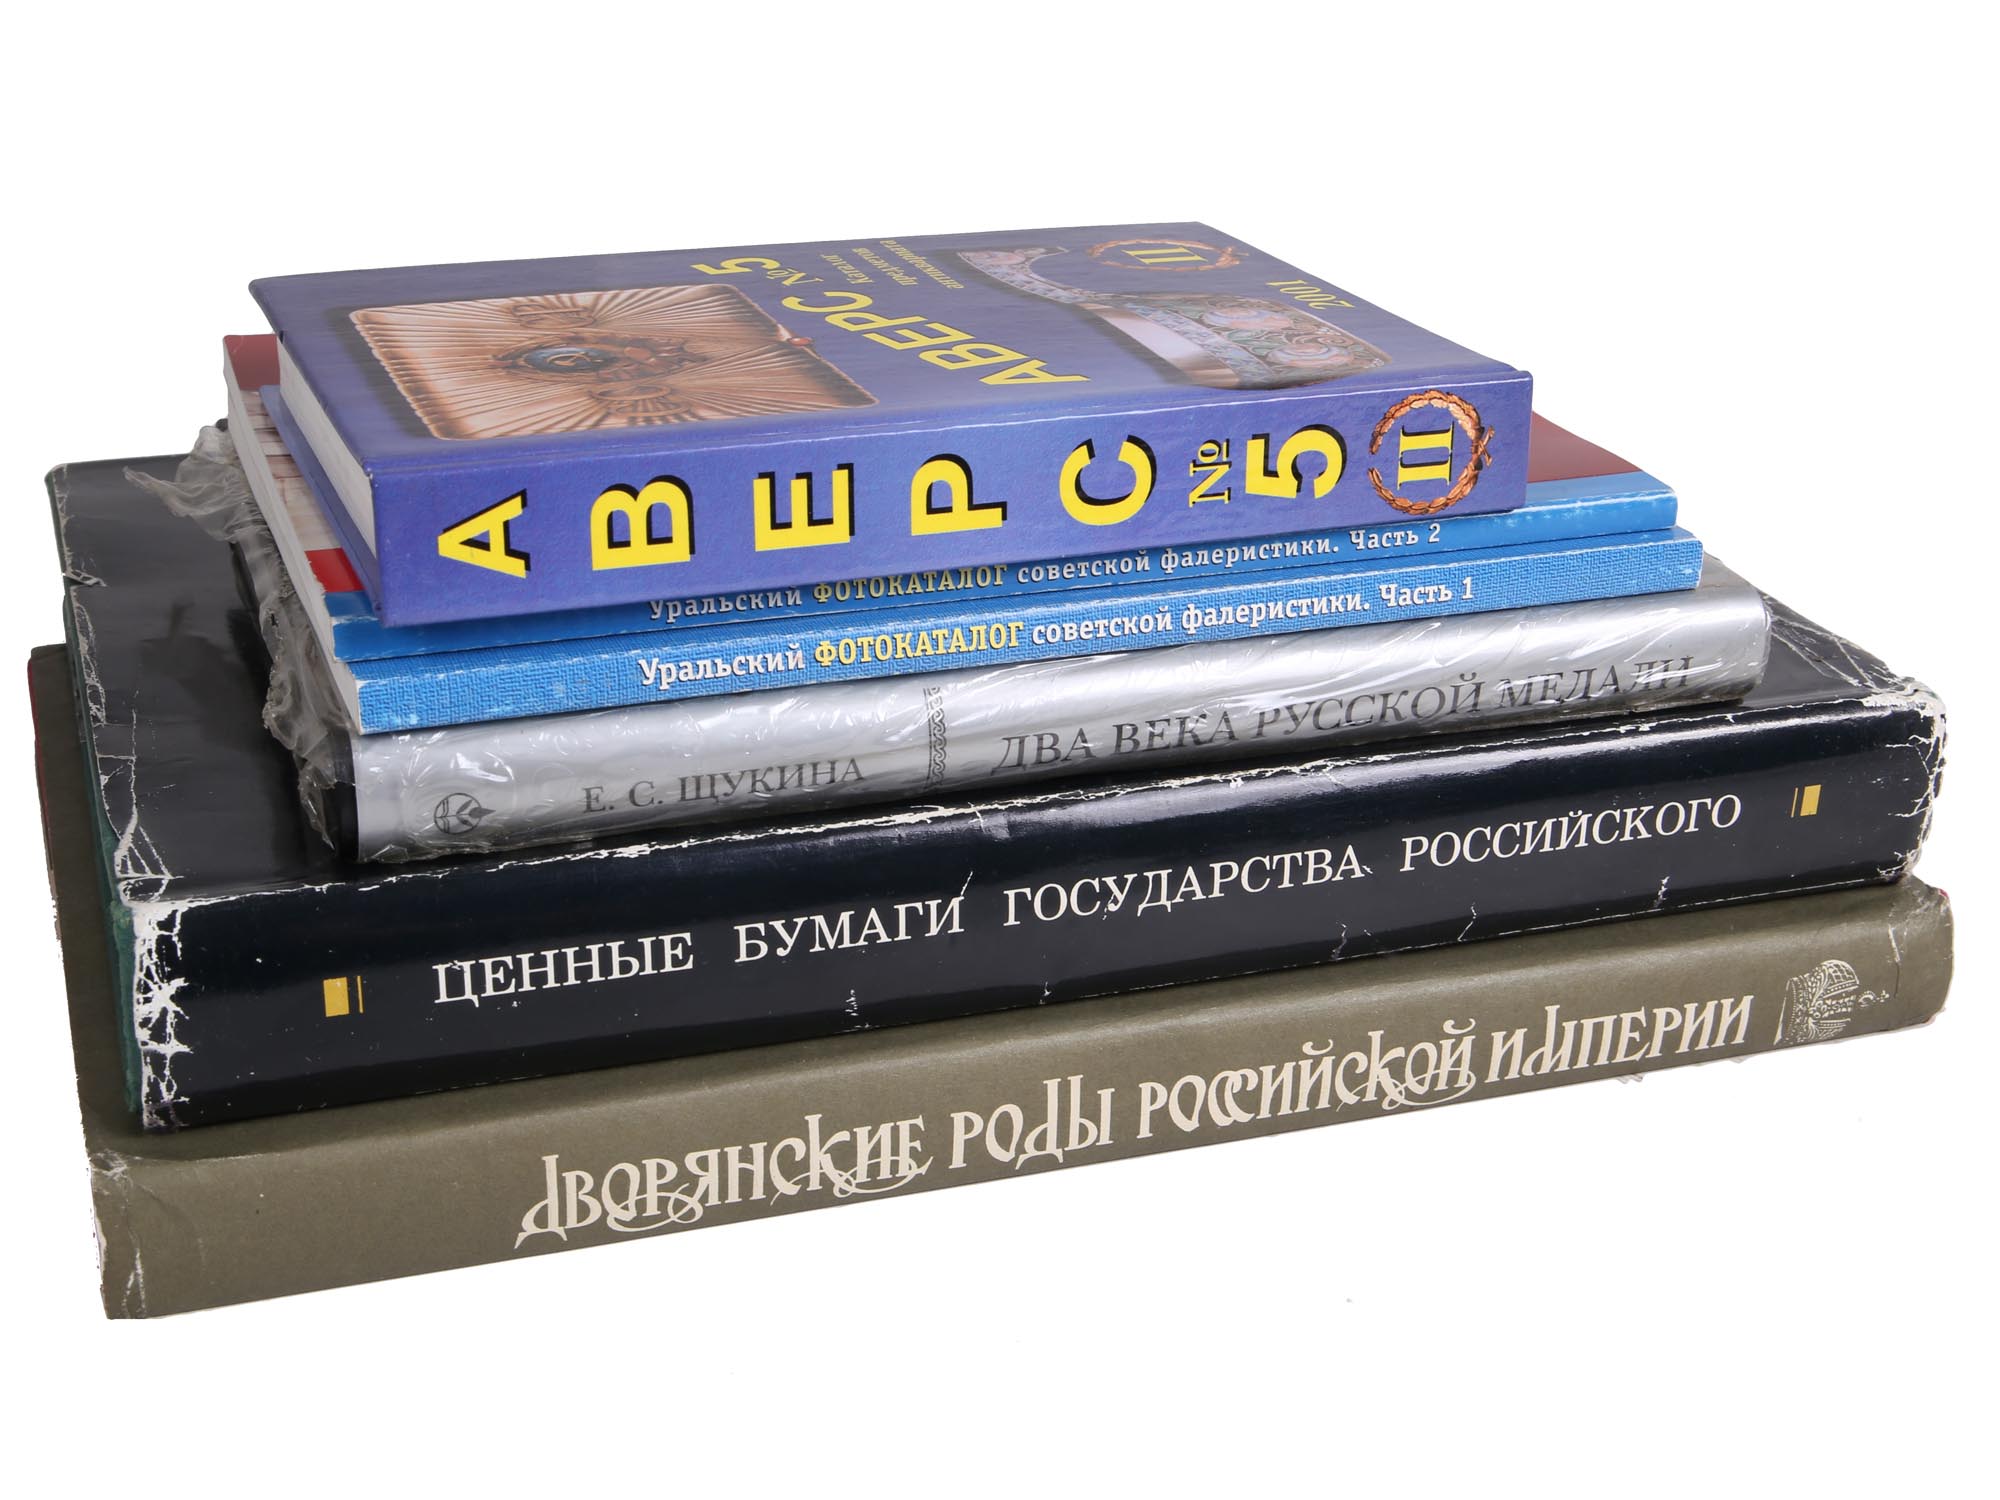 RUSSIAN BOOKS ABOUT MILITARY MEDALS AND ANTIQUES PIC-2